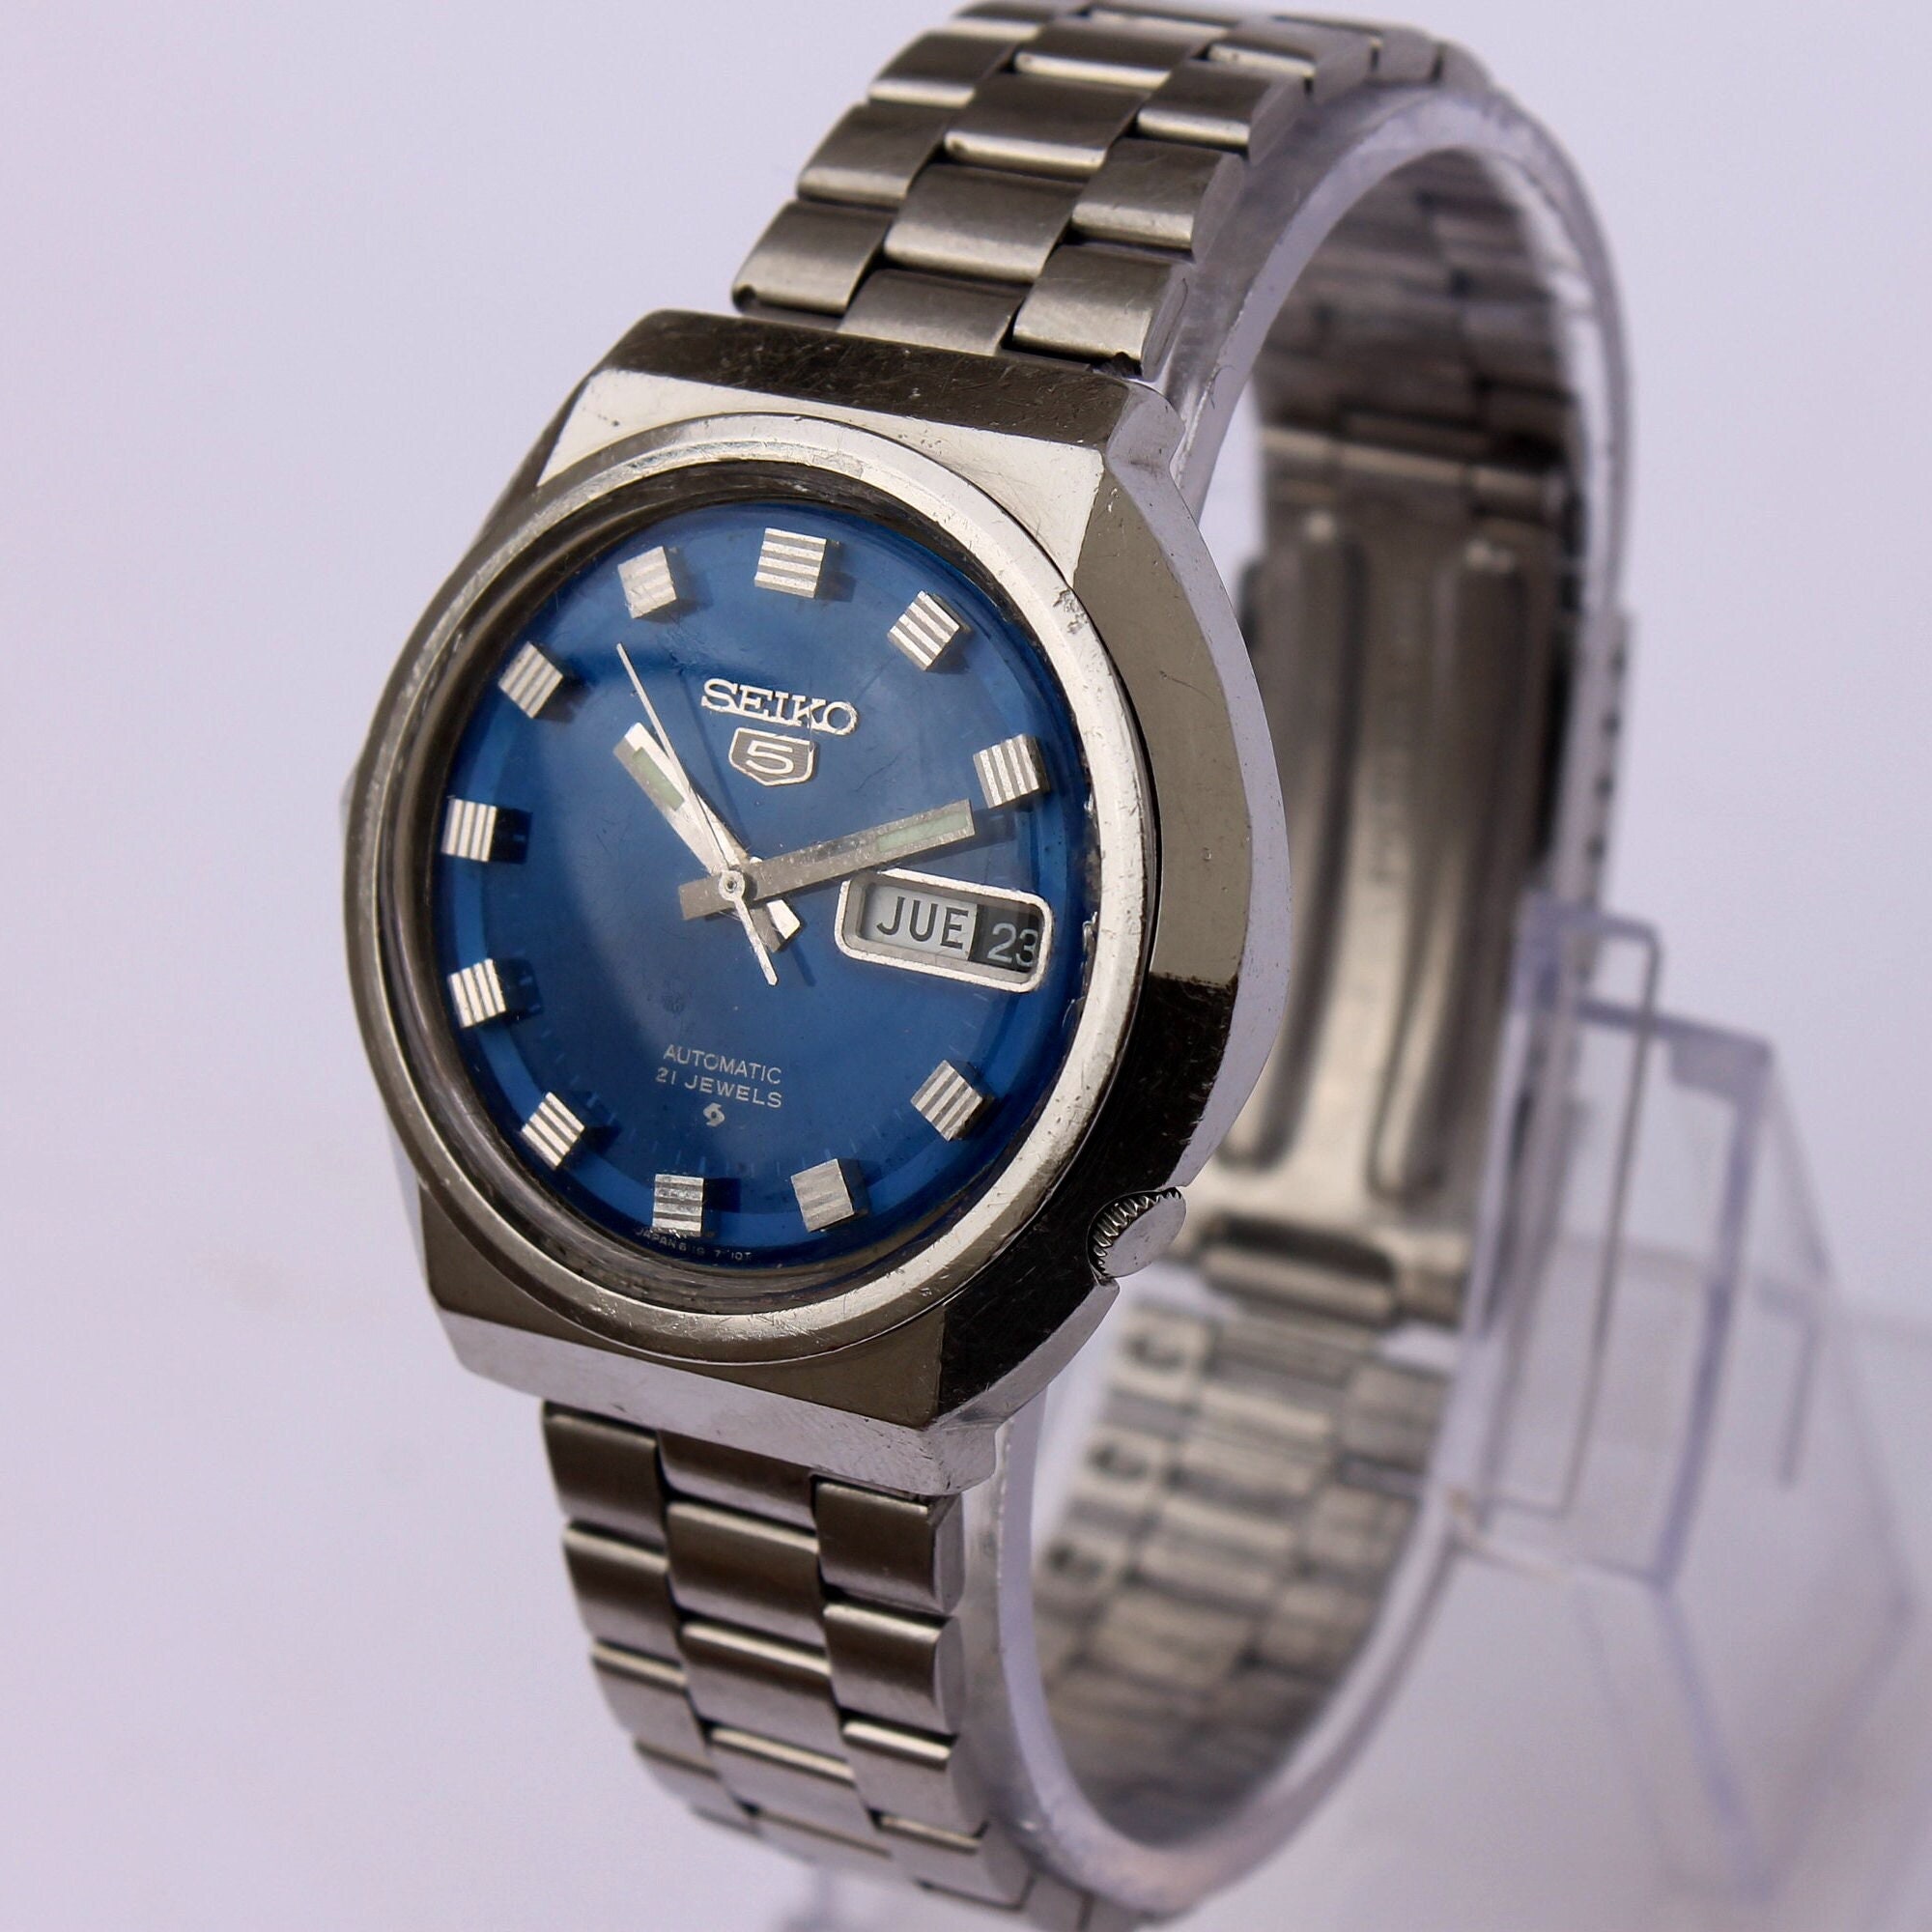 Vintage Seiko 5 6119-7480 Automatic Watch Mens Day Date Blue - Etsy